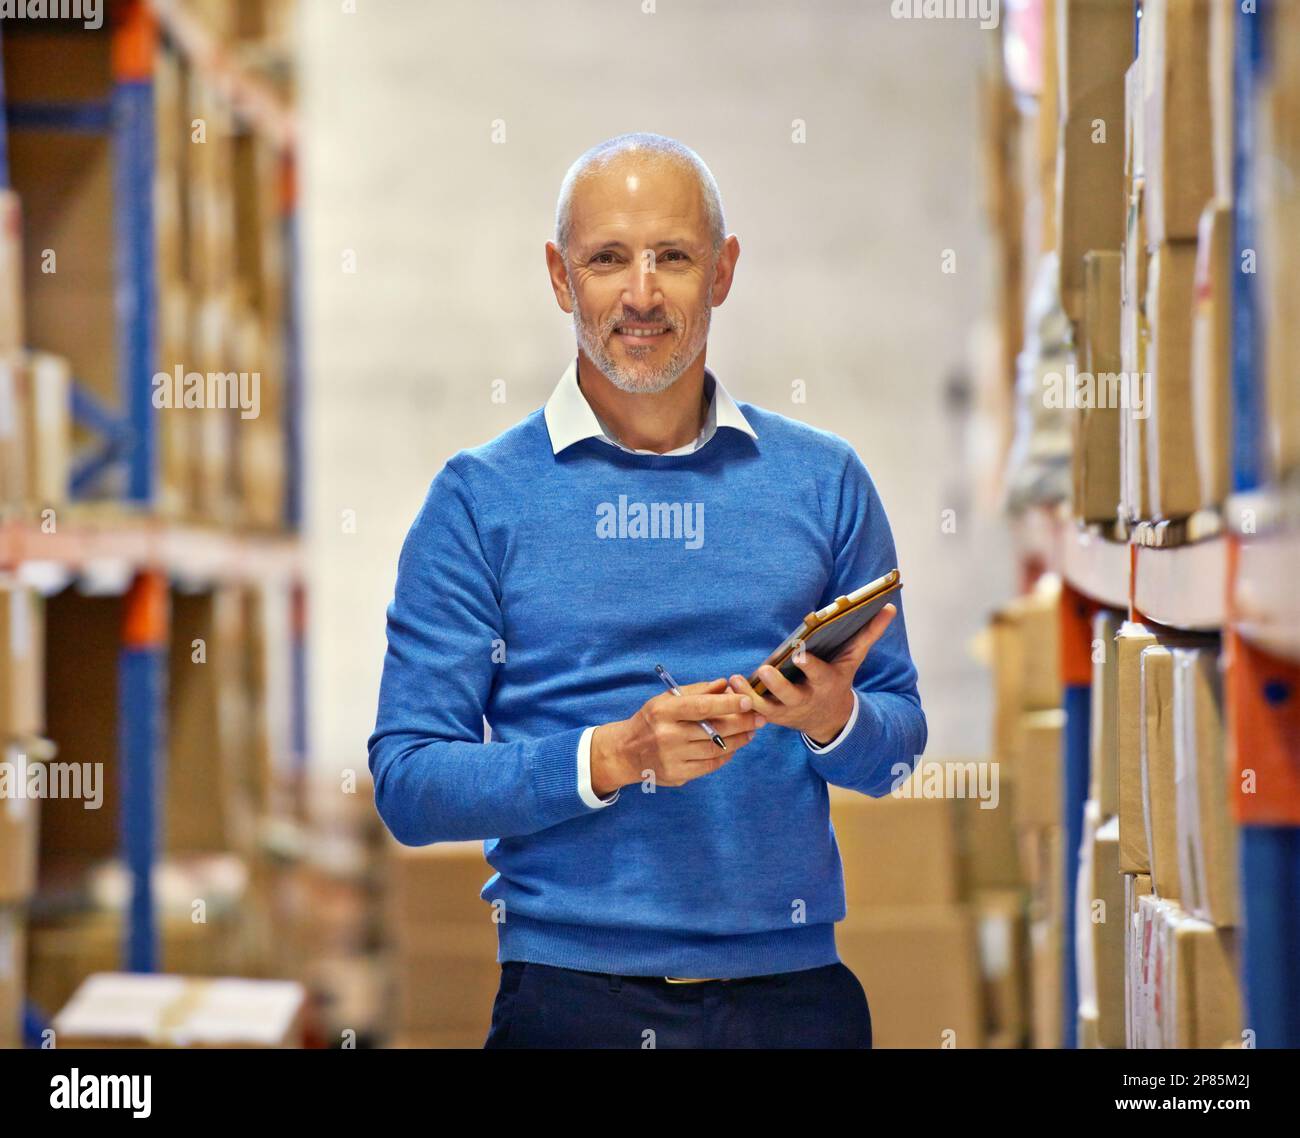 The right man for the job. Portrait of a warehouse manager with a tablet standing amongst shelving. Stock Photo